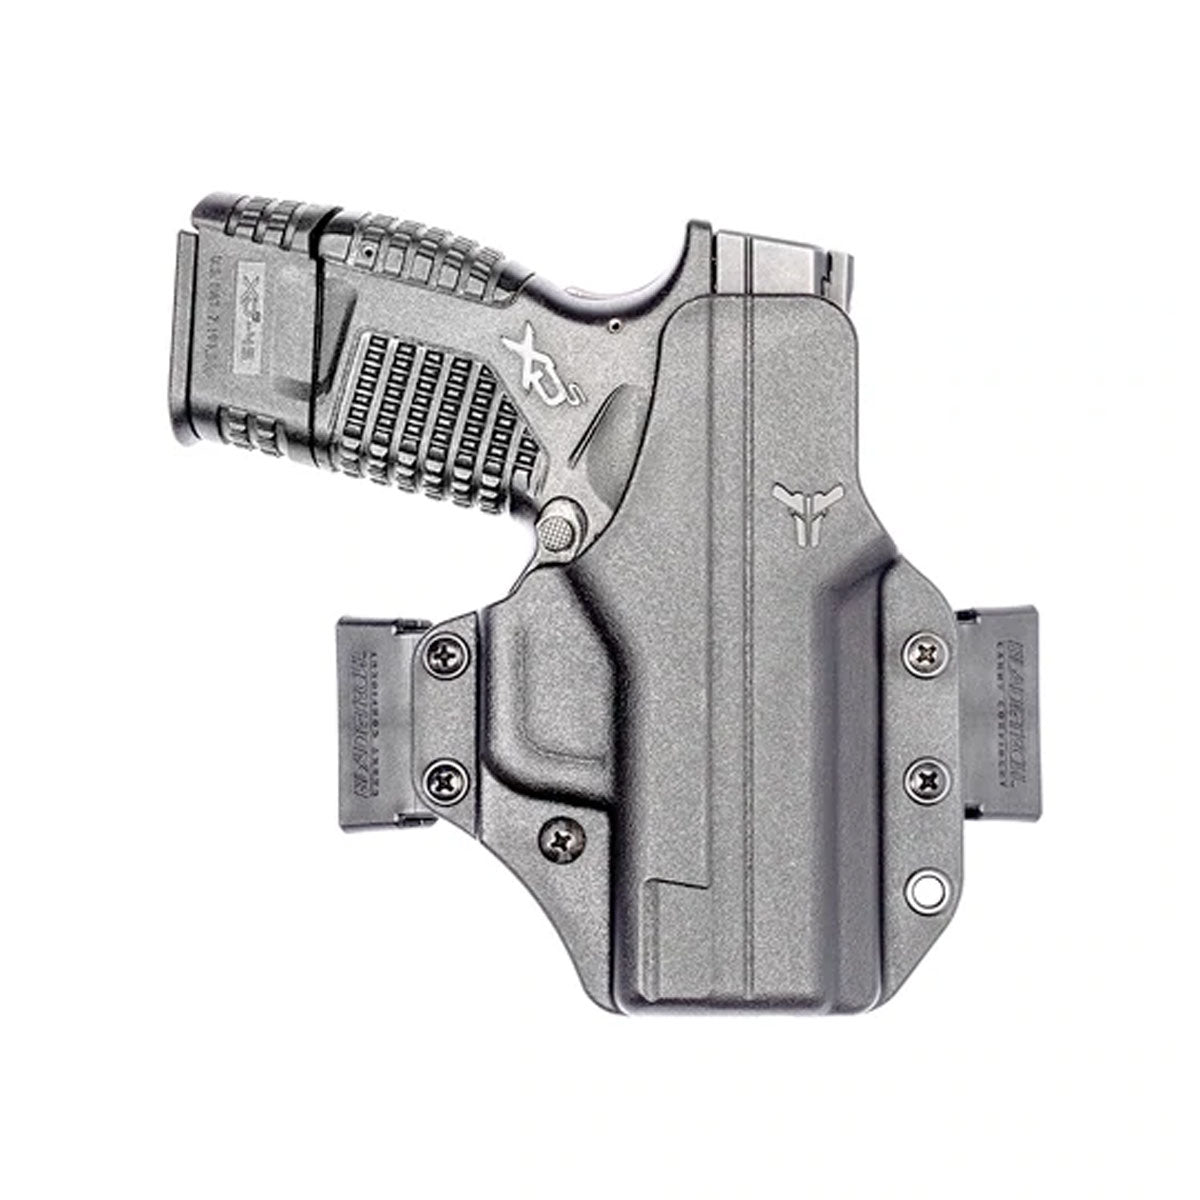 Blade-Tech Total Eclipse OWB Holster Holsters Blade-Tech Holsters Springfield XDS 3.3" Mod 1/2 Tactical Gear Supplier Tactical Distributors Australia